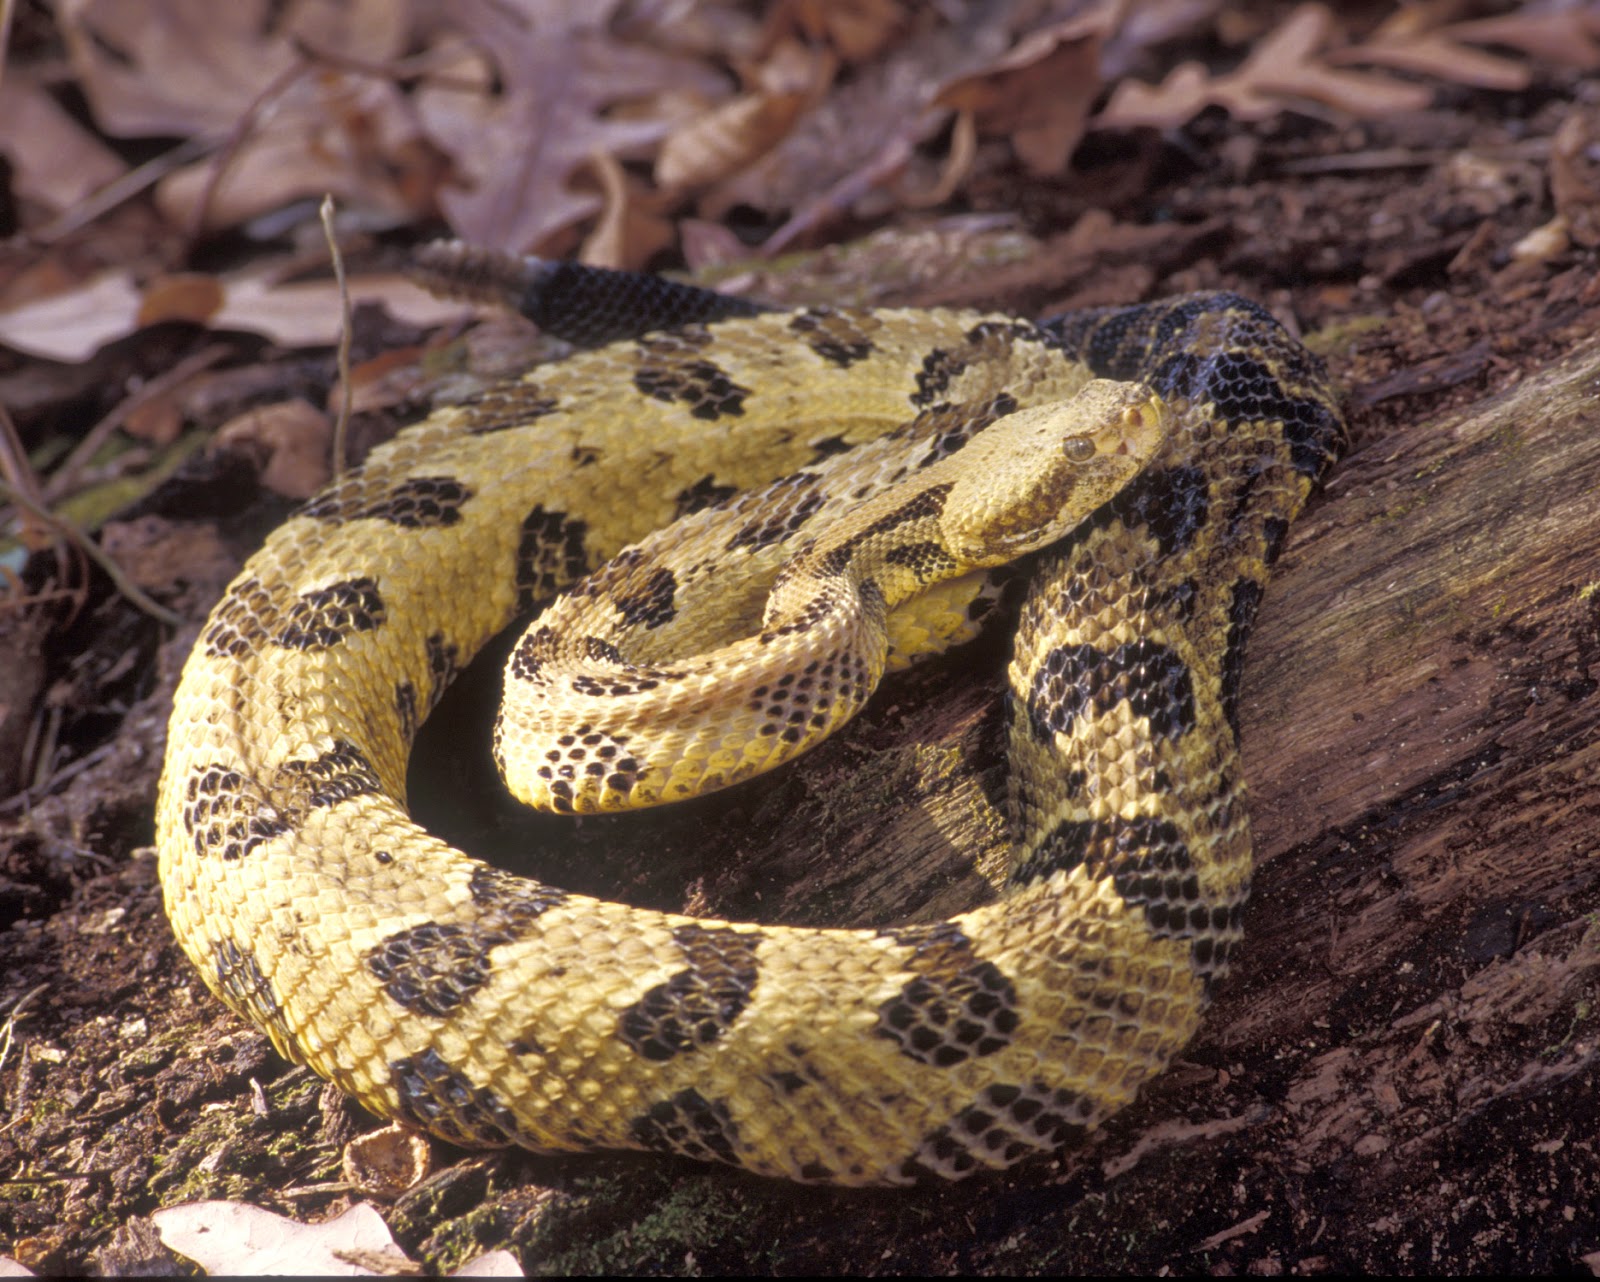 Rules of the Jungle: Timber Rattlesnake